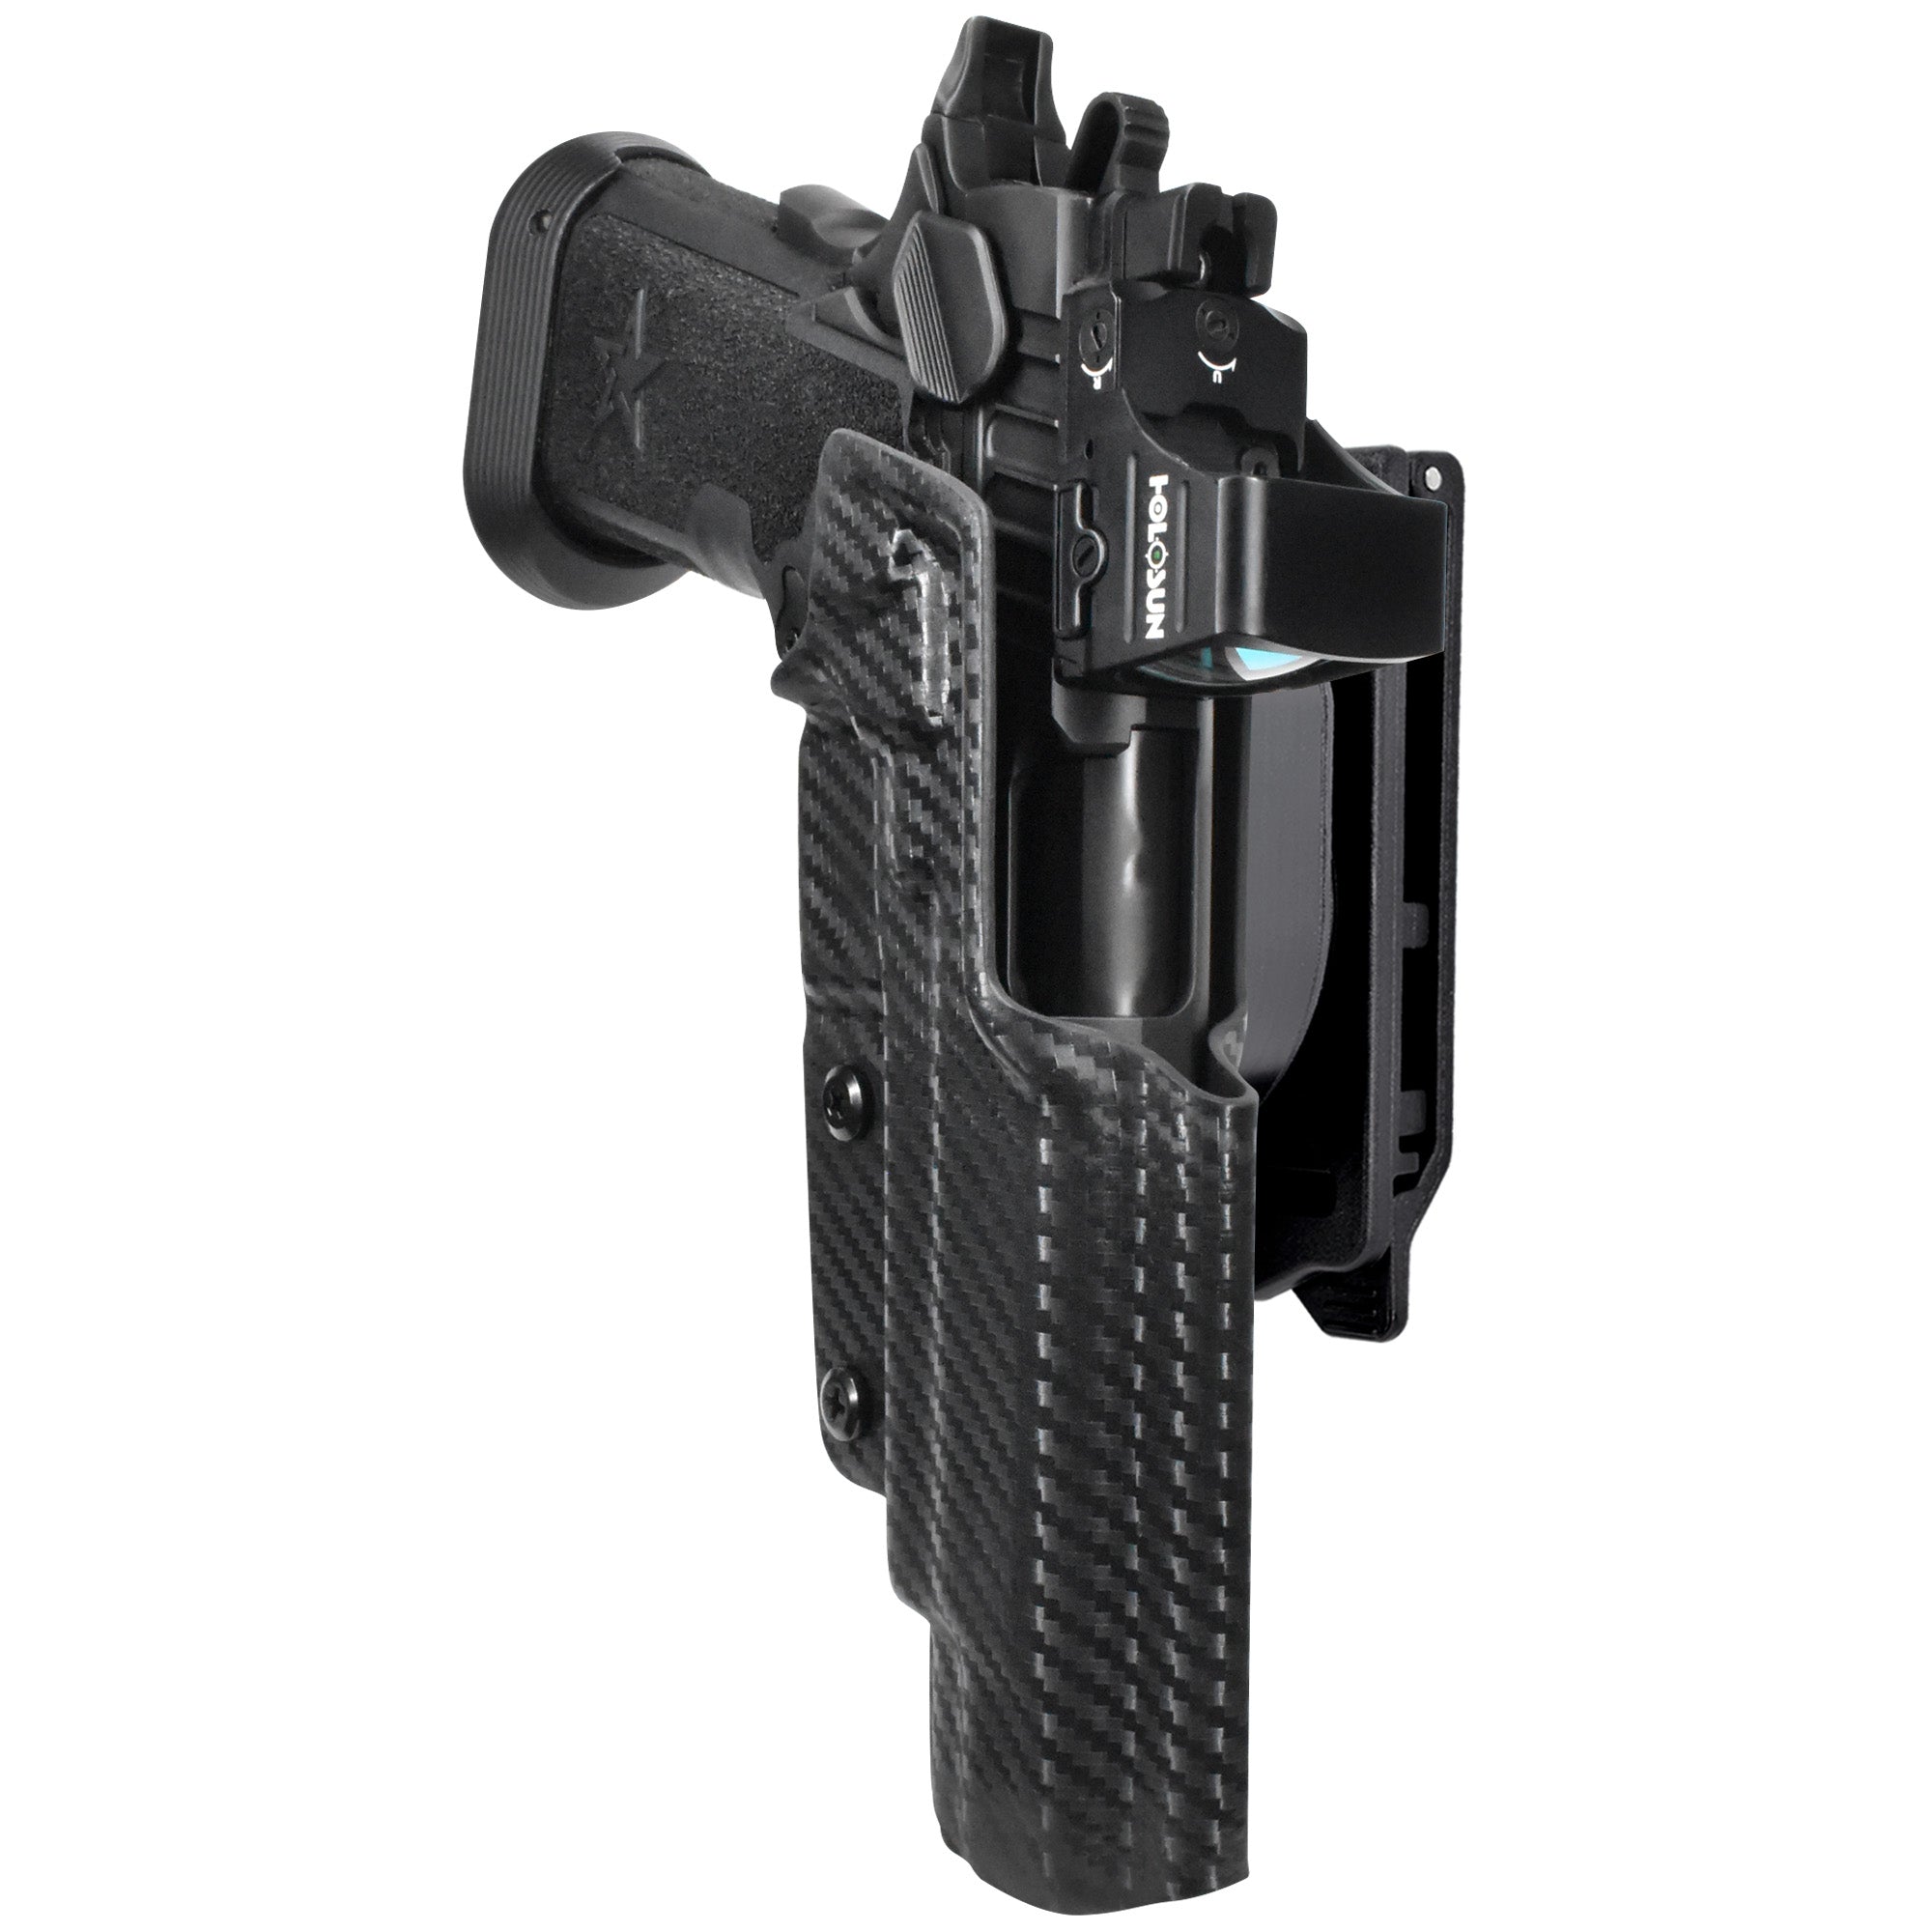 Staccato XL Quick Release IDPA Holster in Carbon Fiber